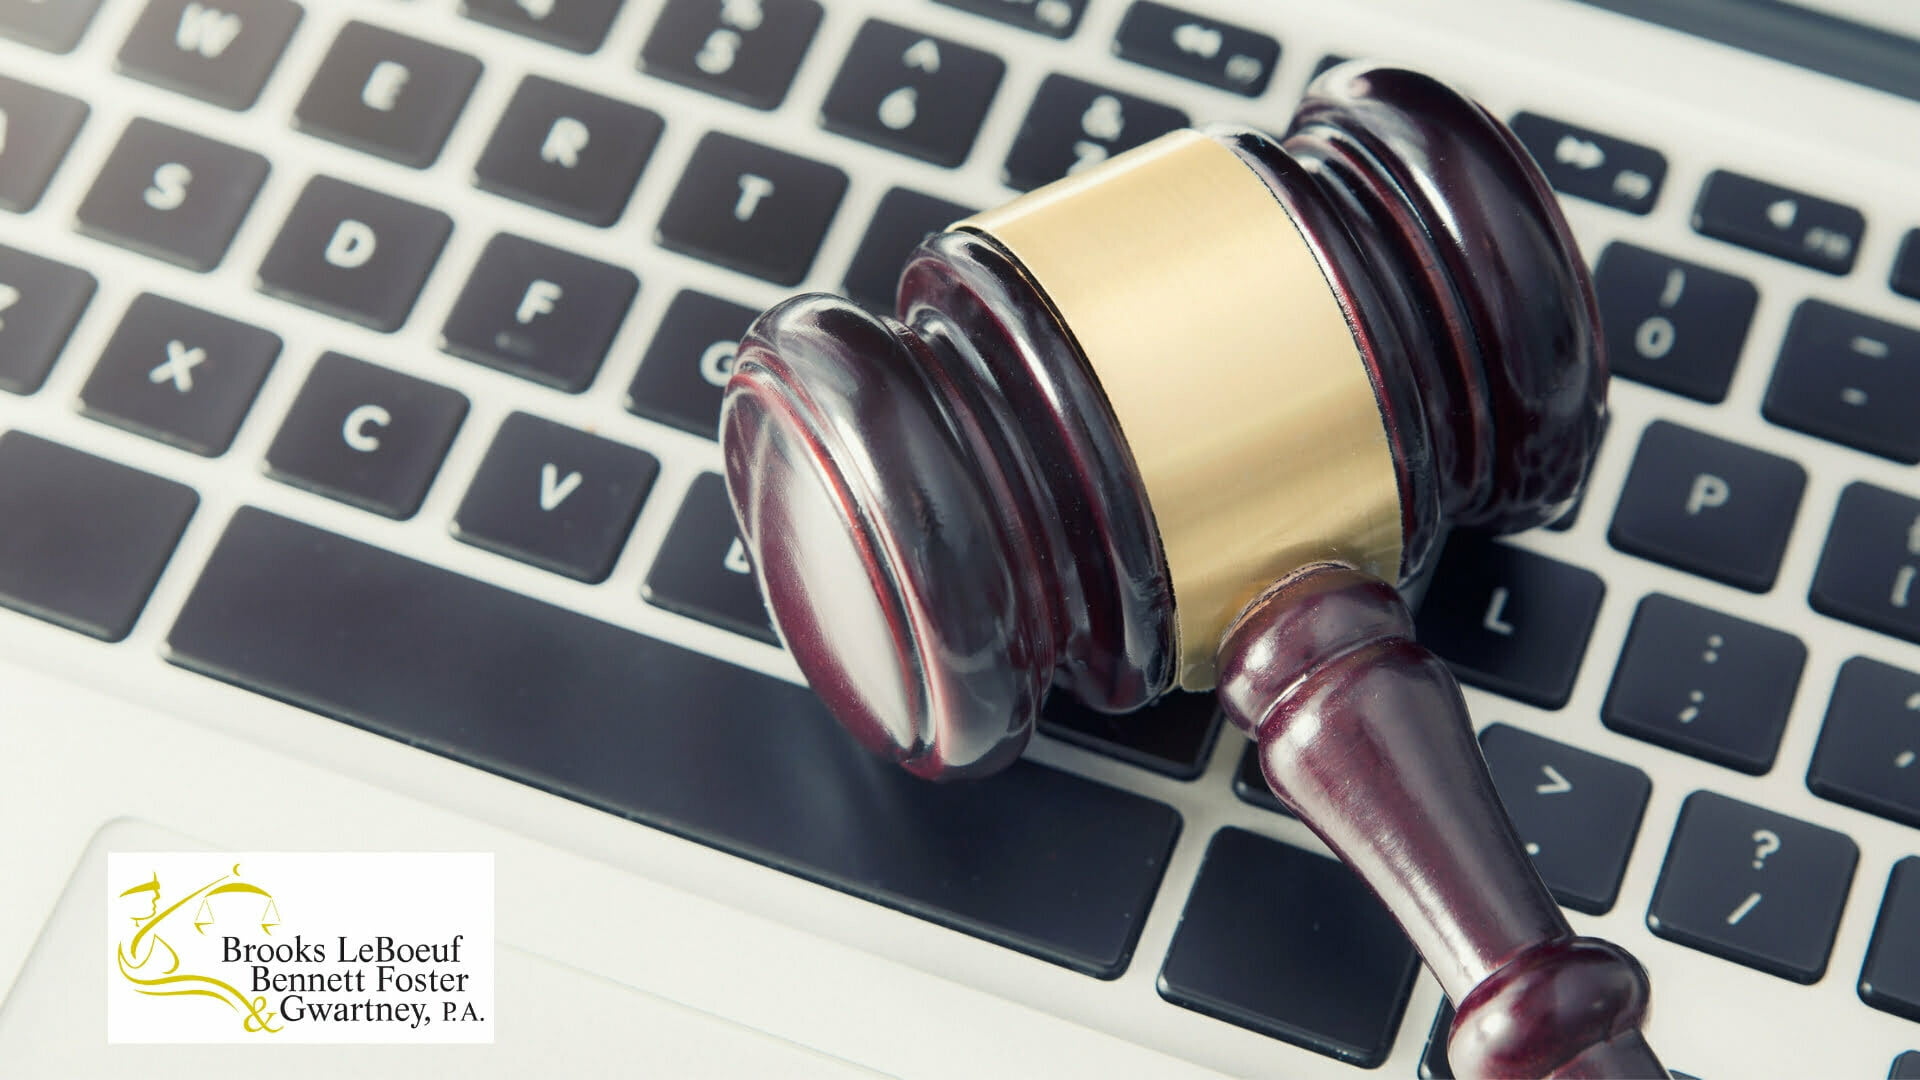 3 Ways Courtroom Technology Can Impact Court Cases